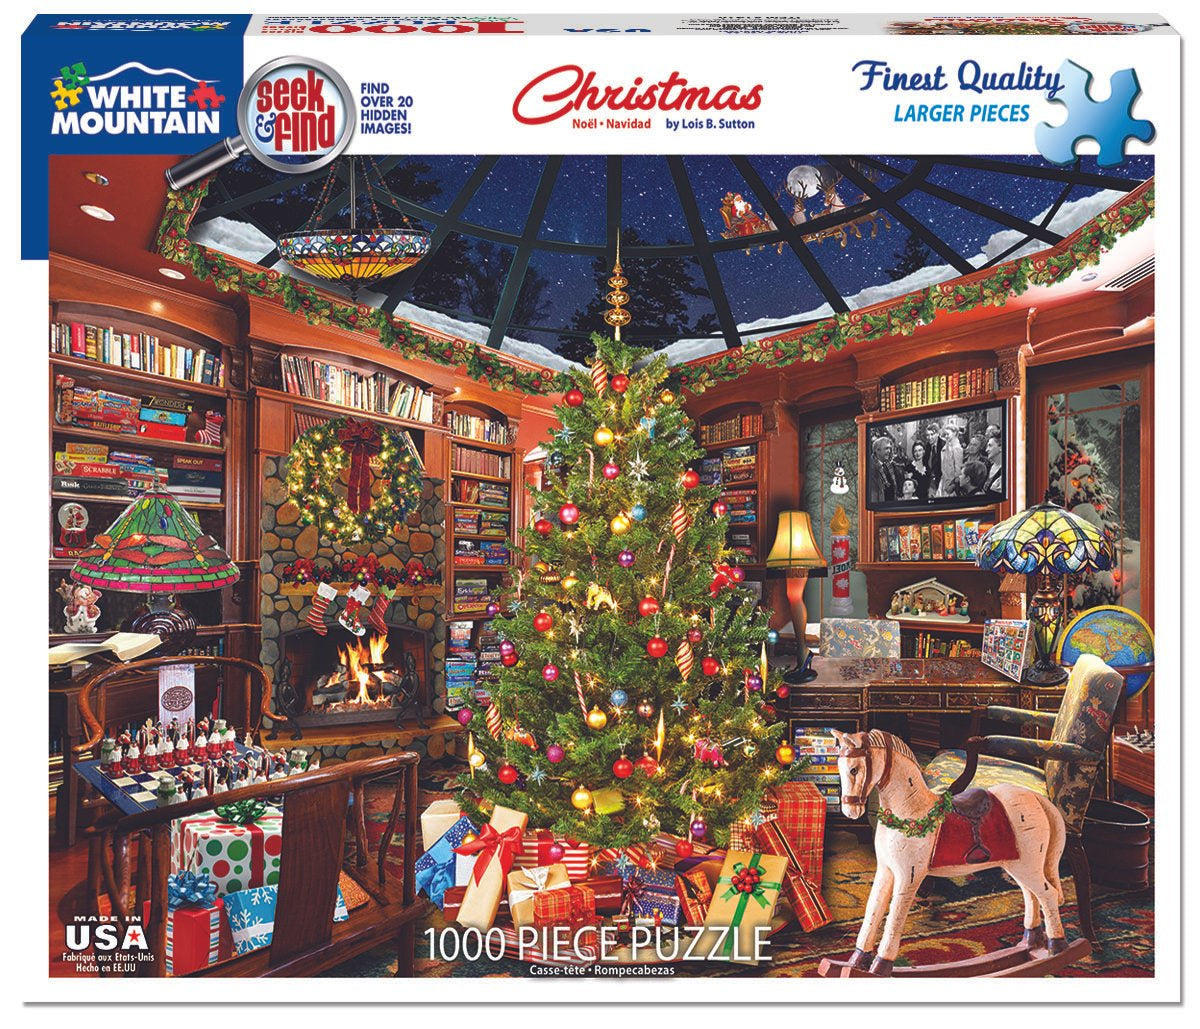 1000 pc Puzzle - Christmas Seek & Find - George & Co.